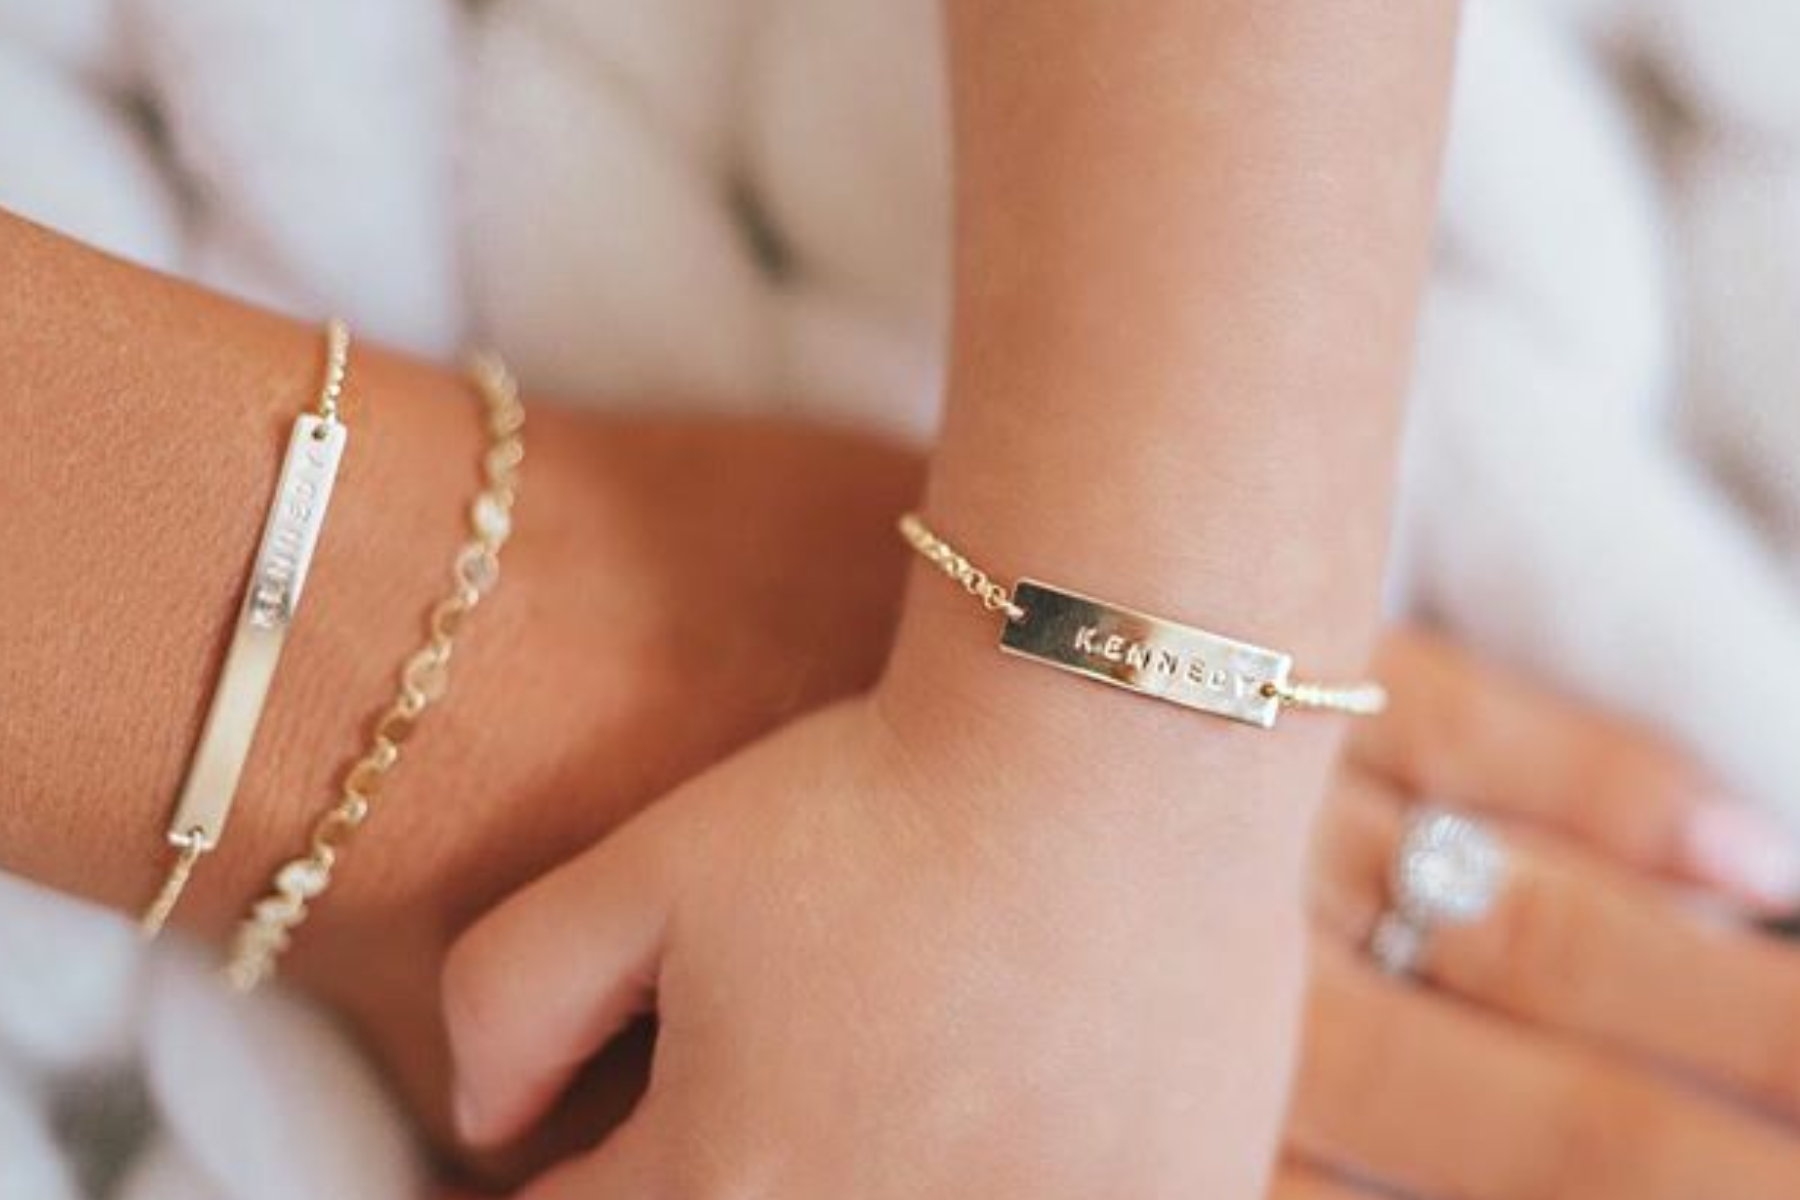 A mother's and a daughter's hands wearing the same bracelet